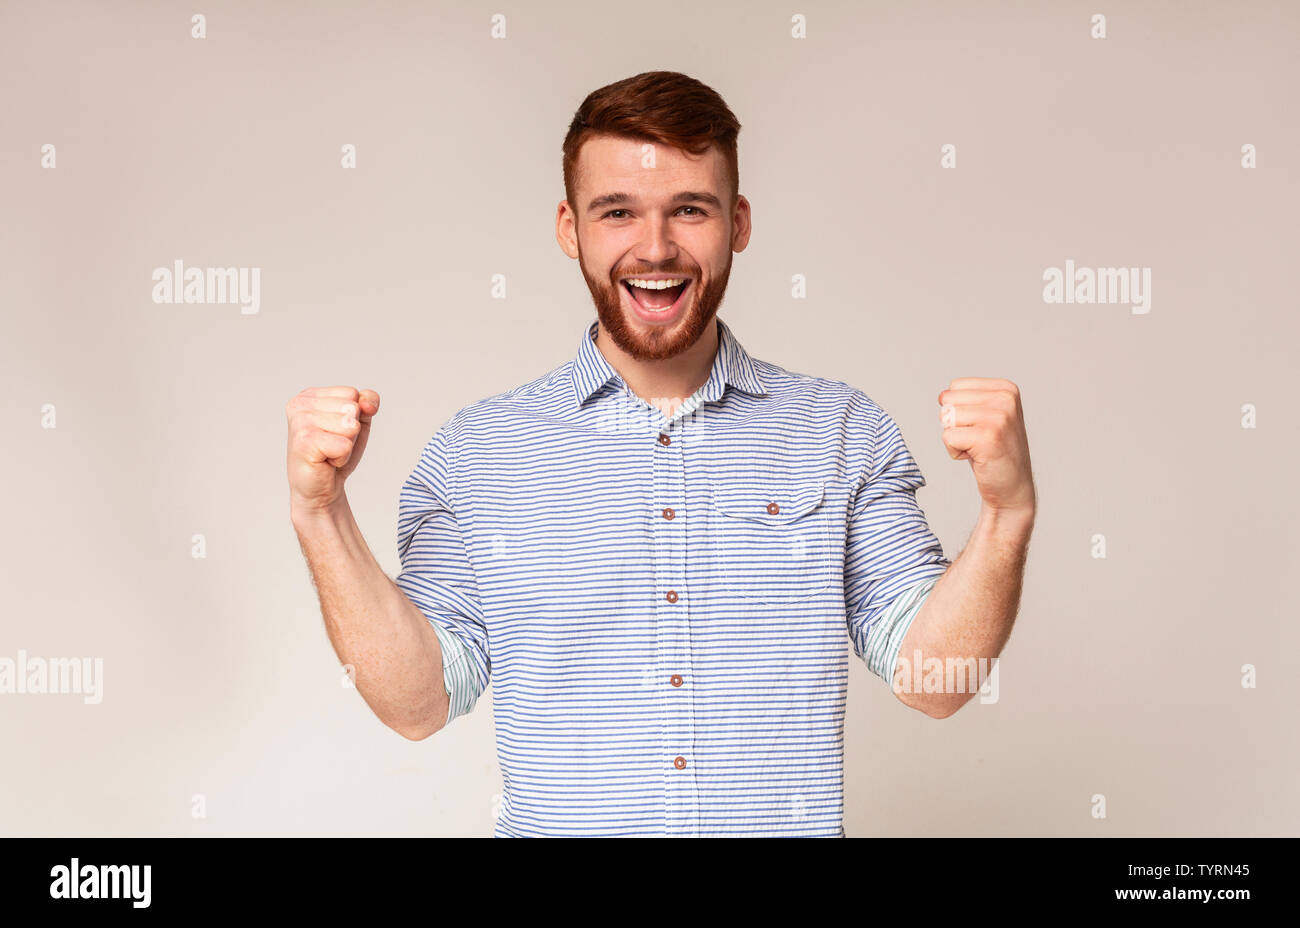 Cheerful guy showing his biceps and smiling Stock Photo